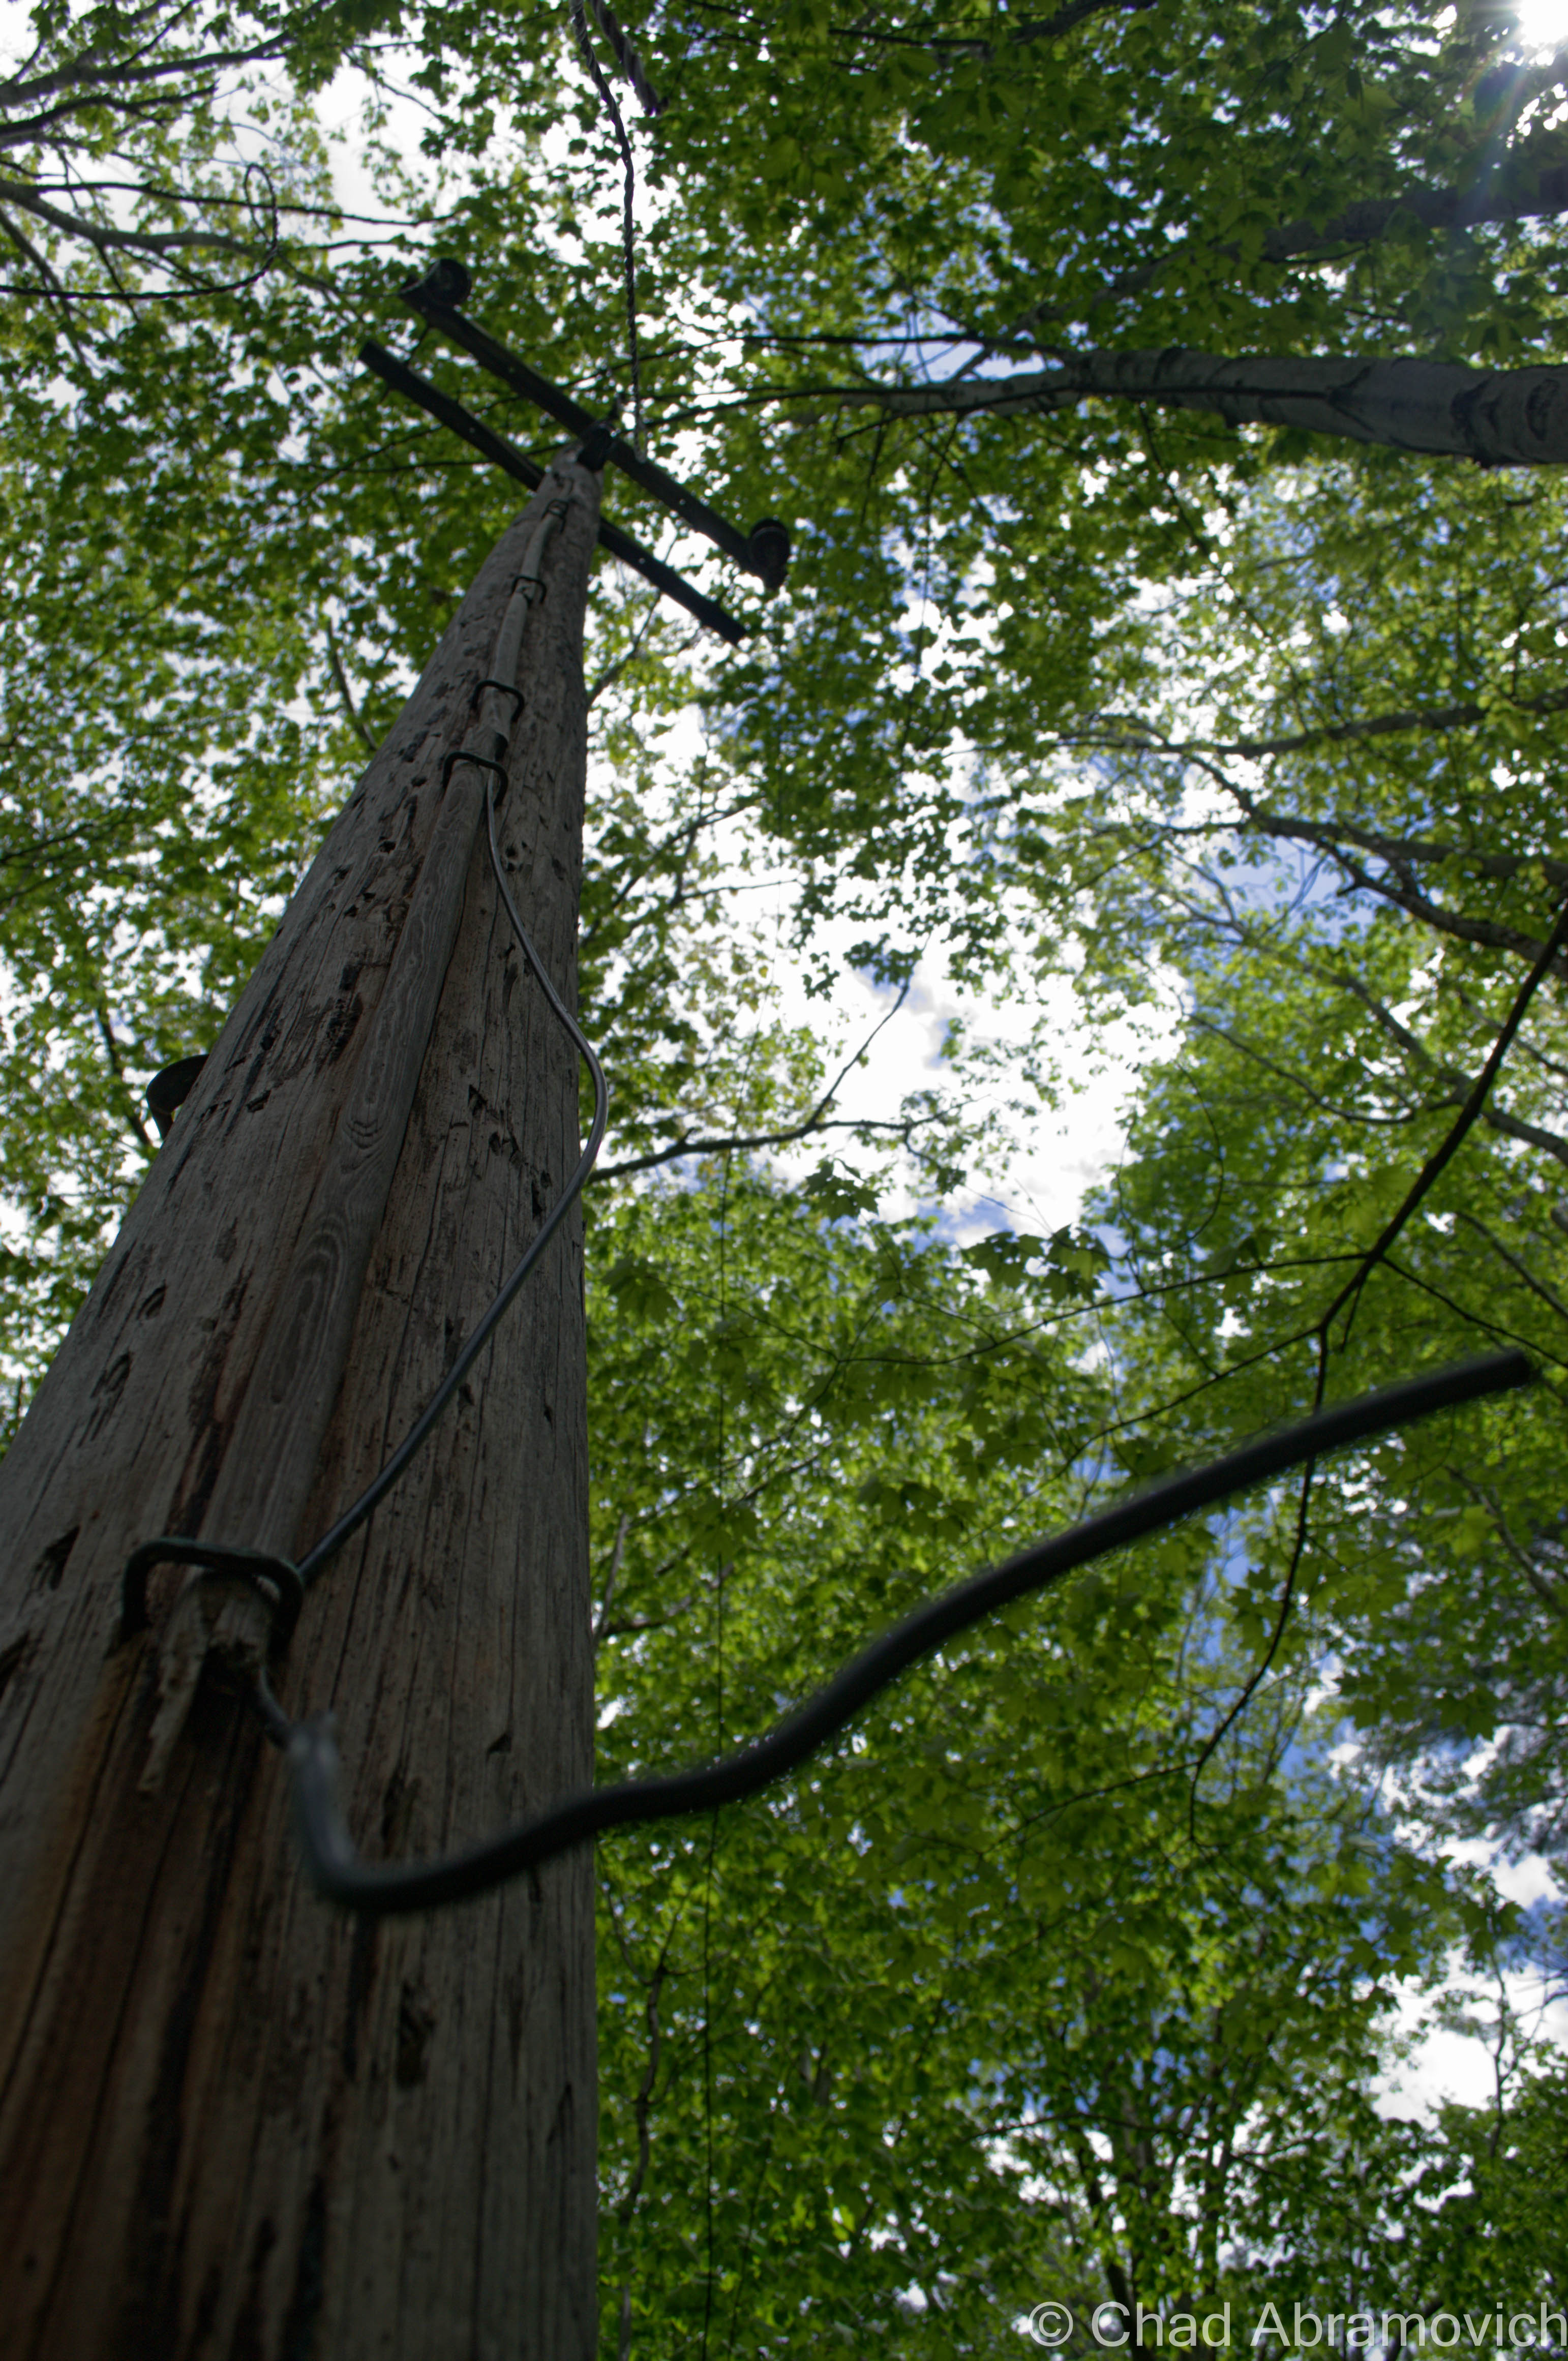 the former utility pole that powered the ski hill, now also abandoned and defunct.